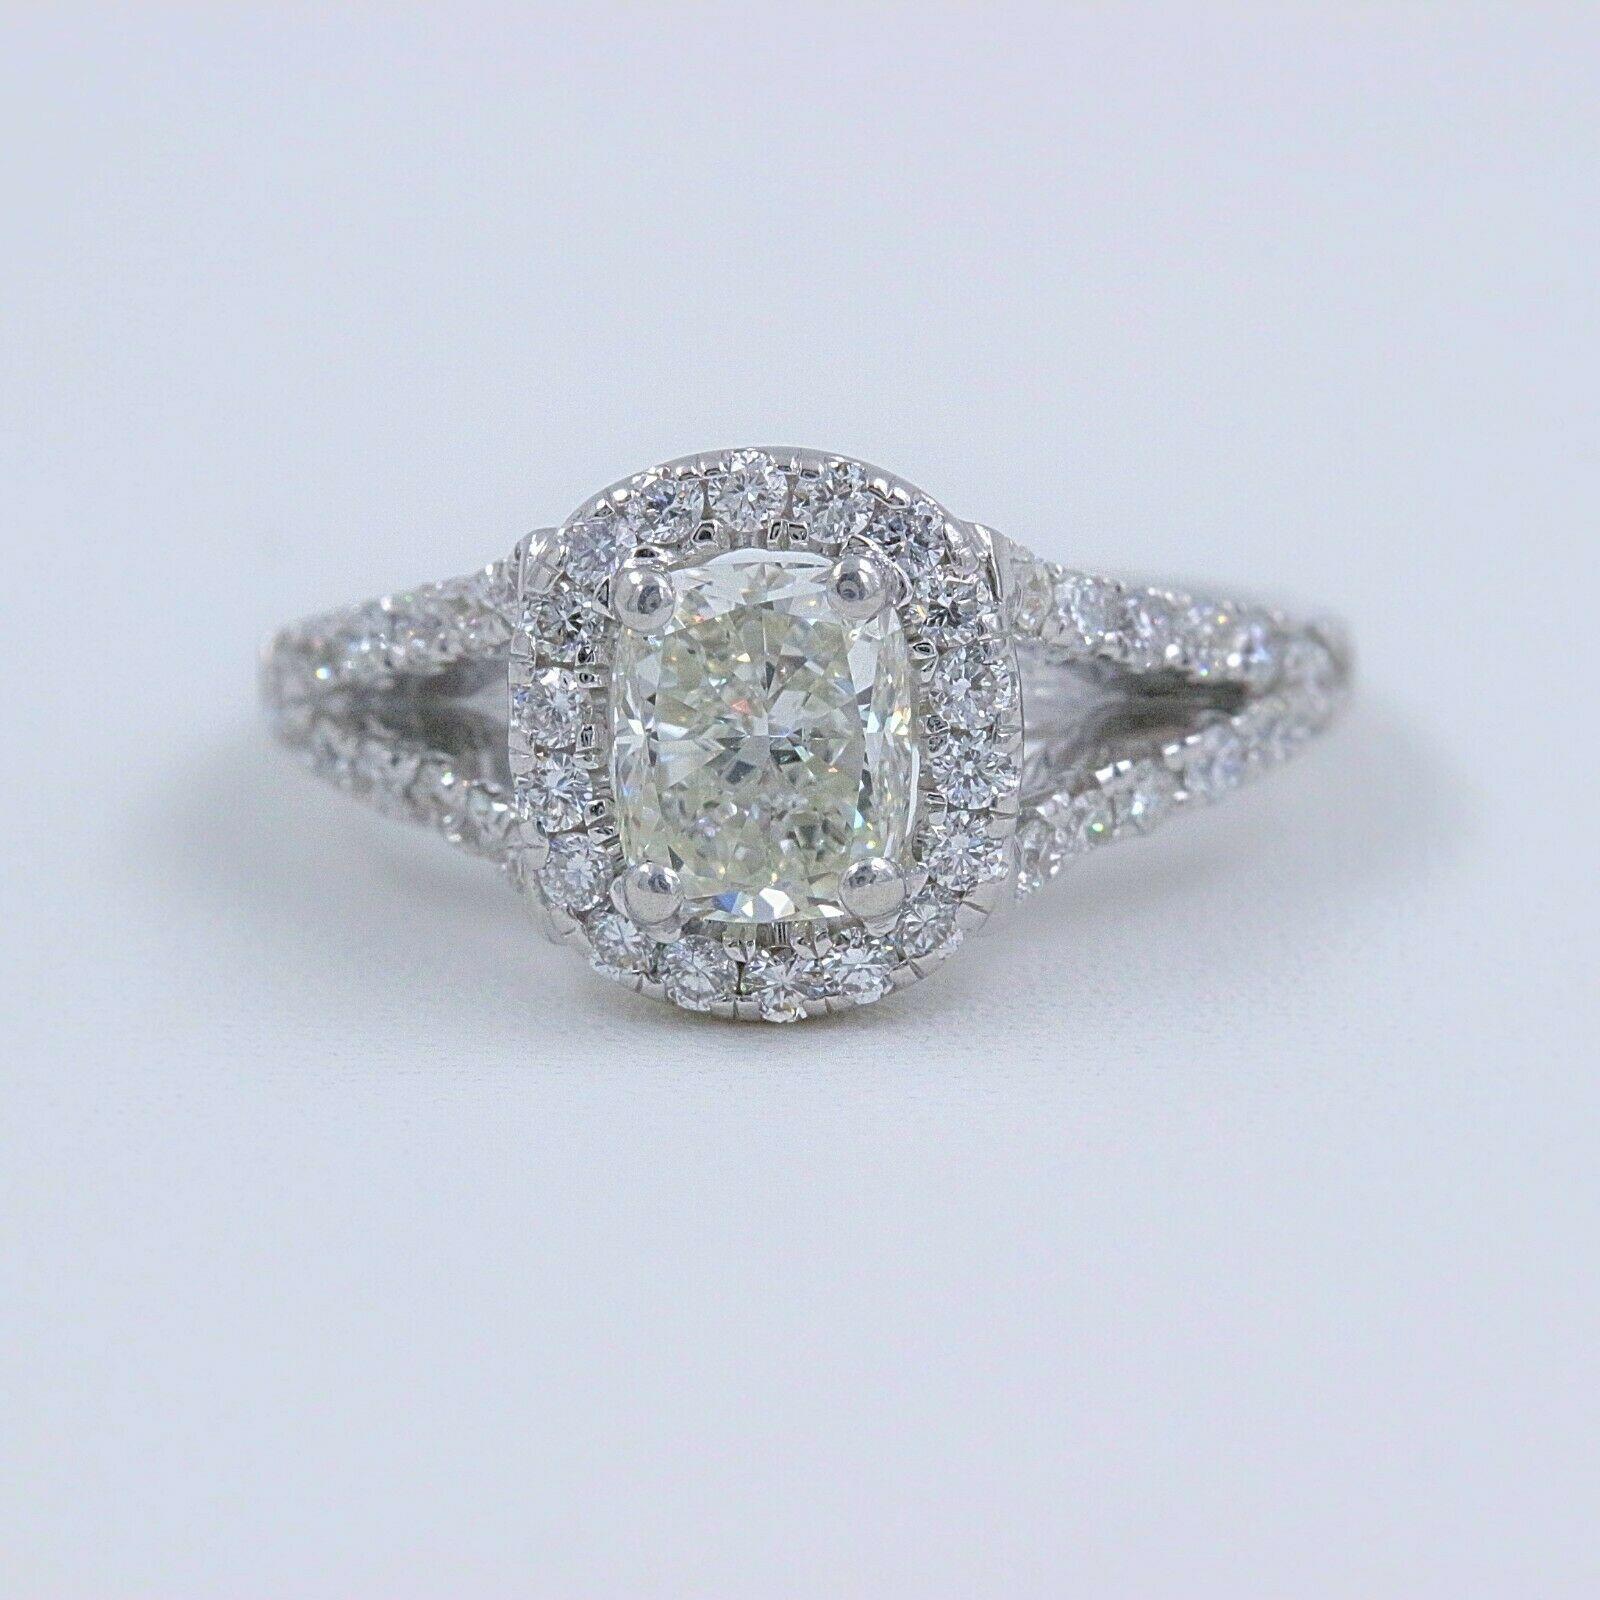 Cushion Halo Diamond Engagement Ring 1.55 Carat 14 Karat White Gold In New Condition For Sale In San Diego, CA